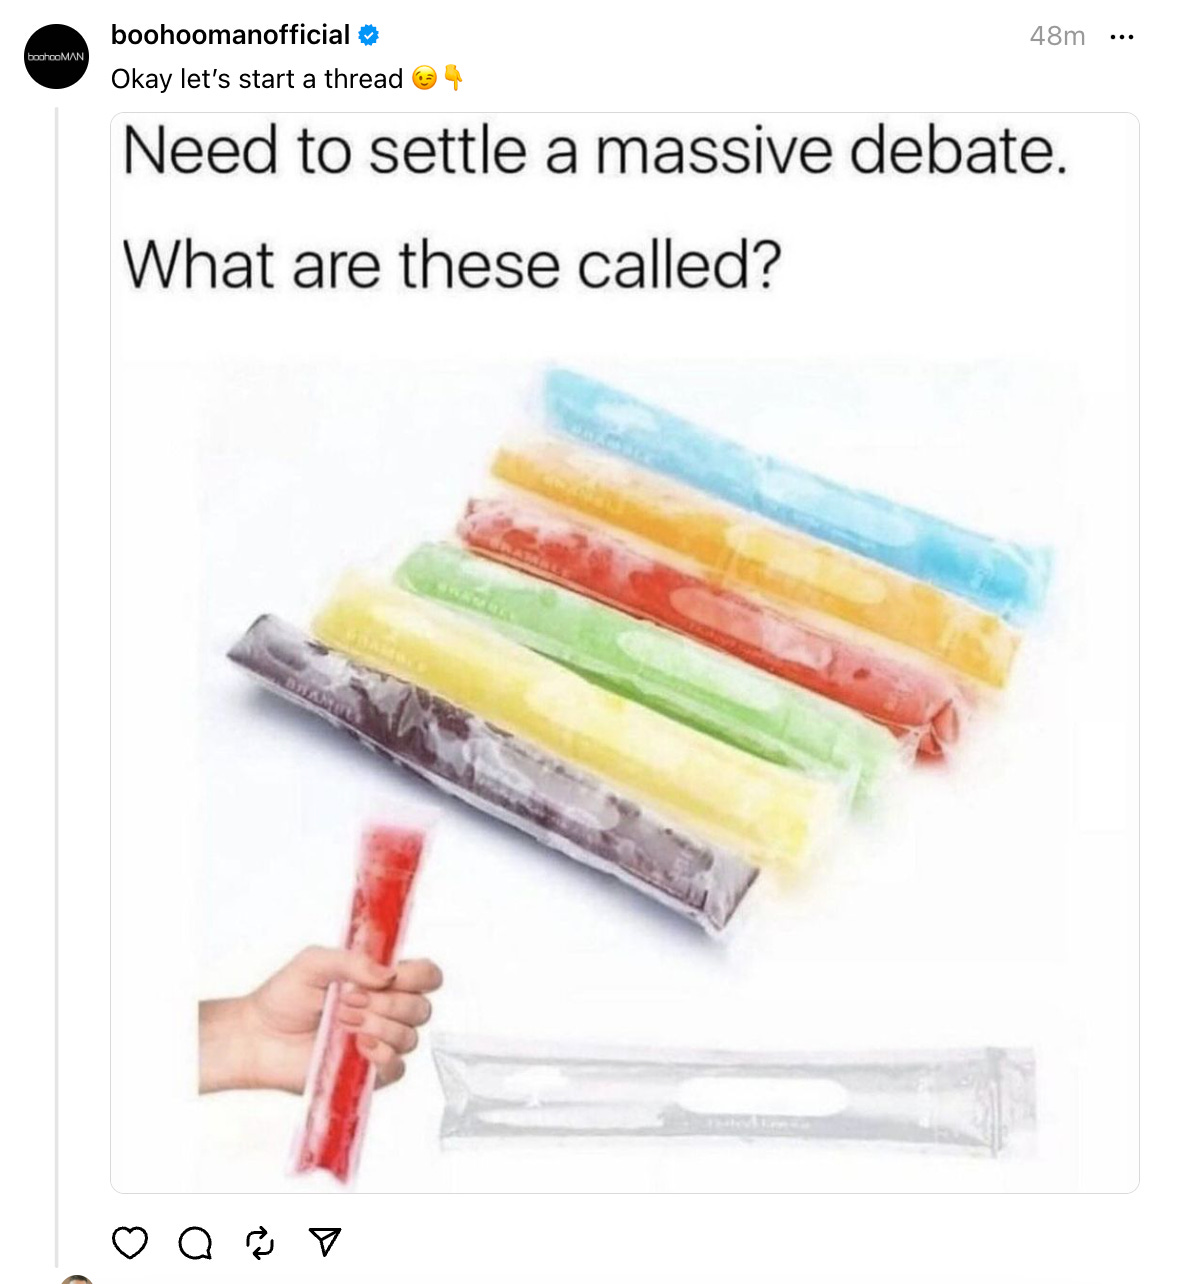  social media post from the account "boohoomanofficial" with verified status. The post reads, "Okay let’s start a thread 😏👇," followed by a text image that says, "Need to settle a massive debate. What are these called?" Below the text is a photo of several frozen treat tubes in various colors, indicating an assortment of flavors, with one being held in a hand and another empty tube beside it.